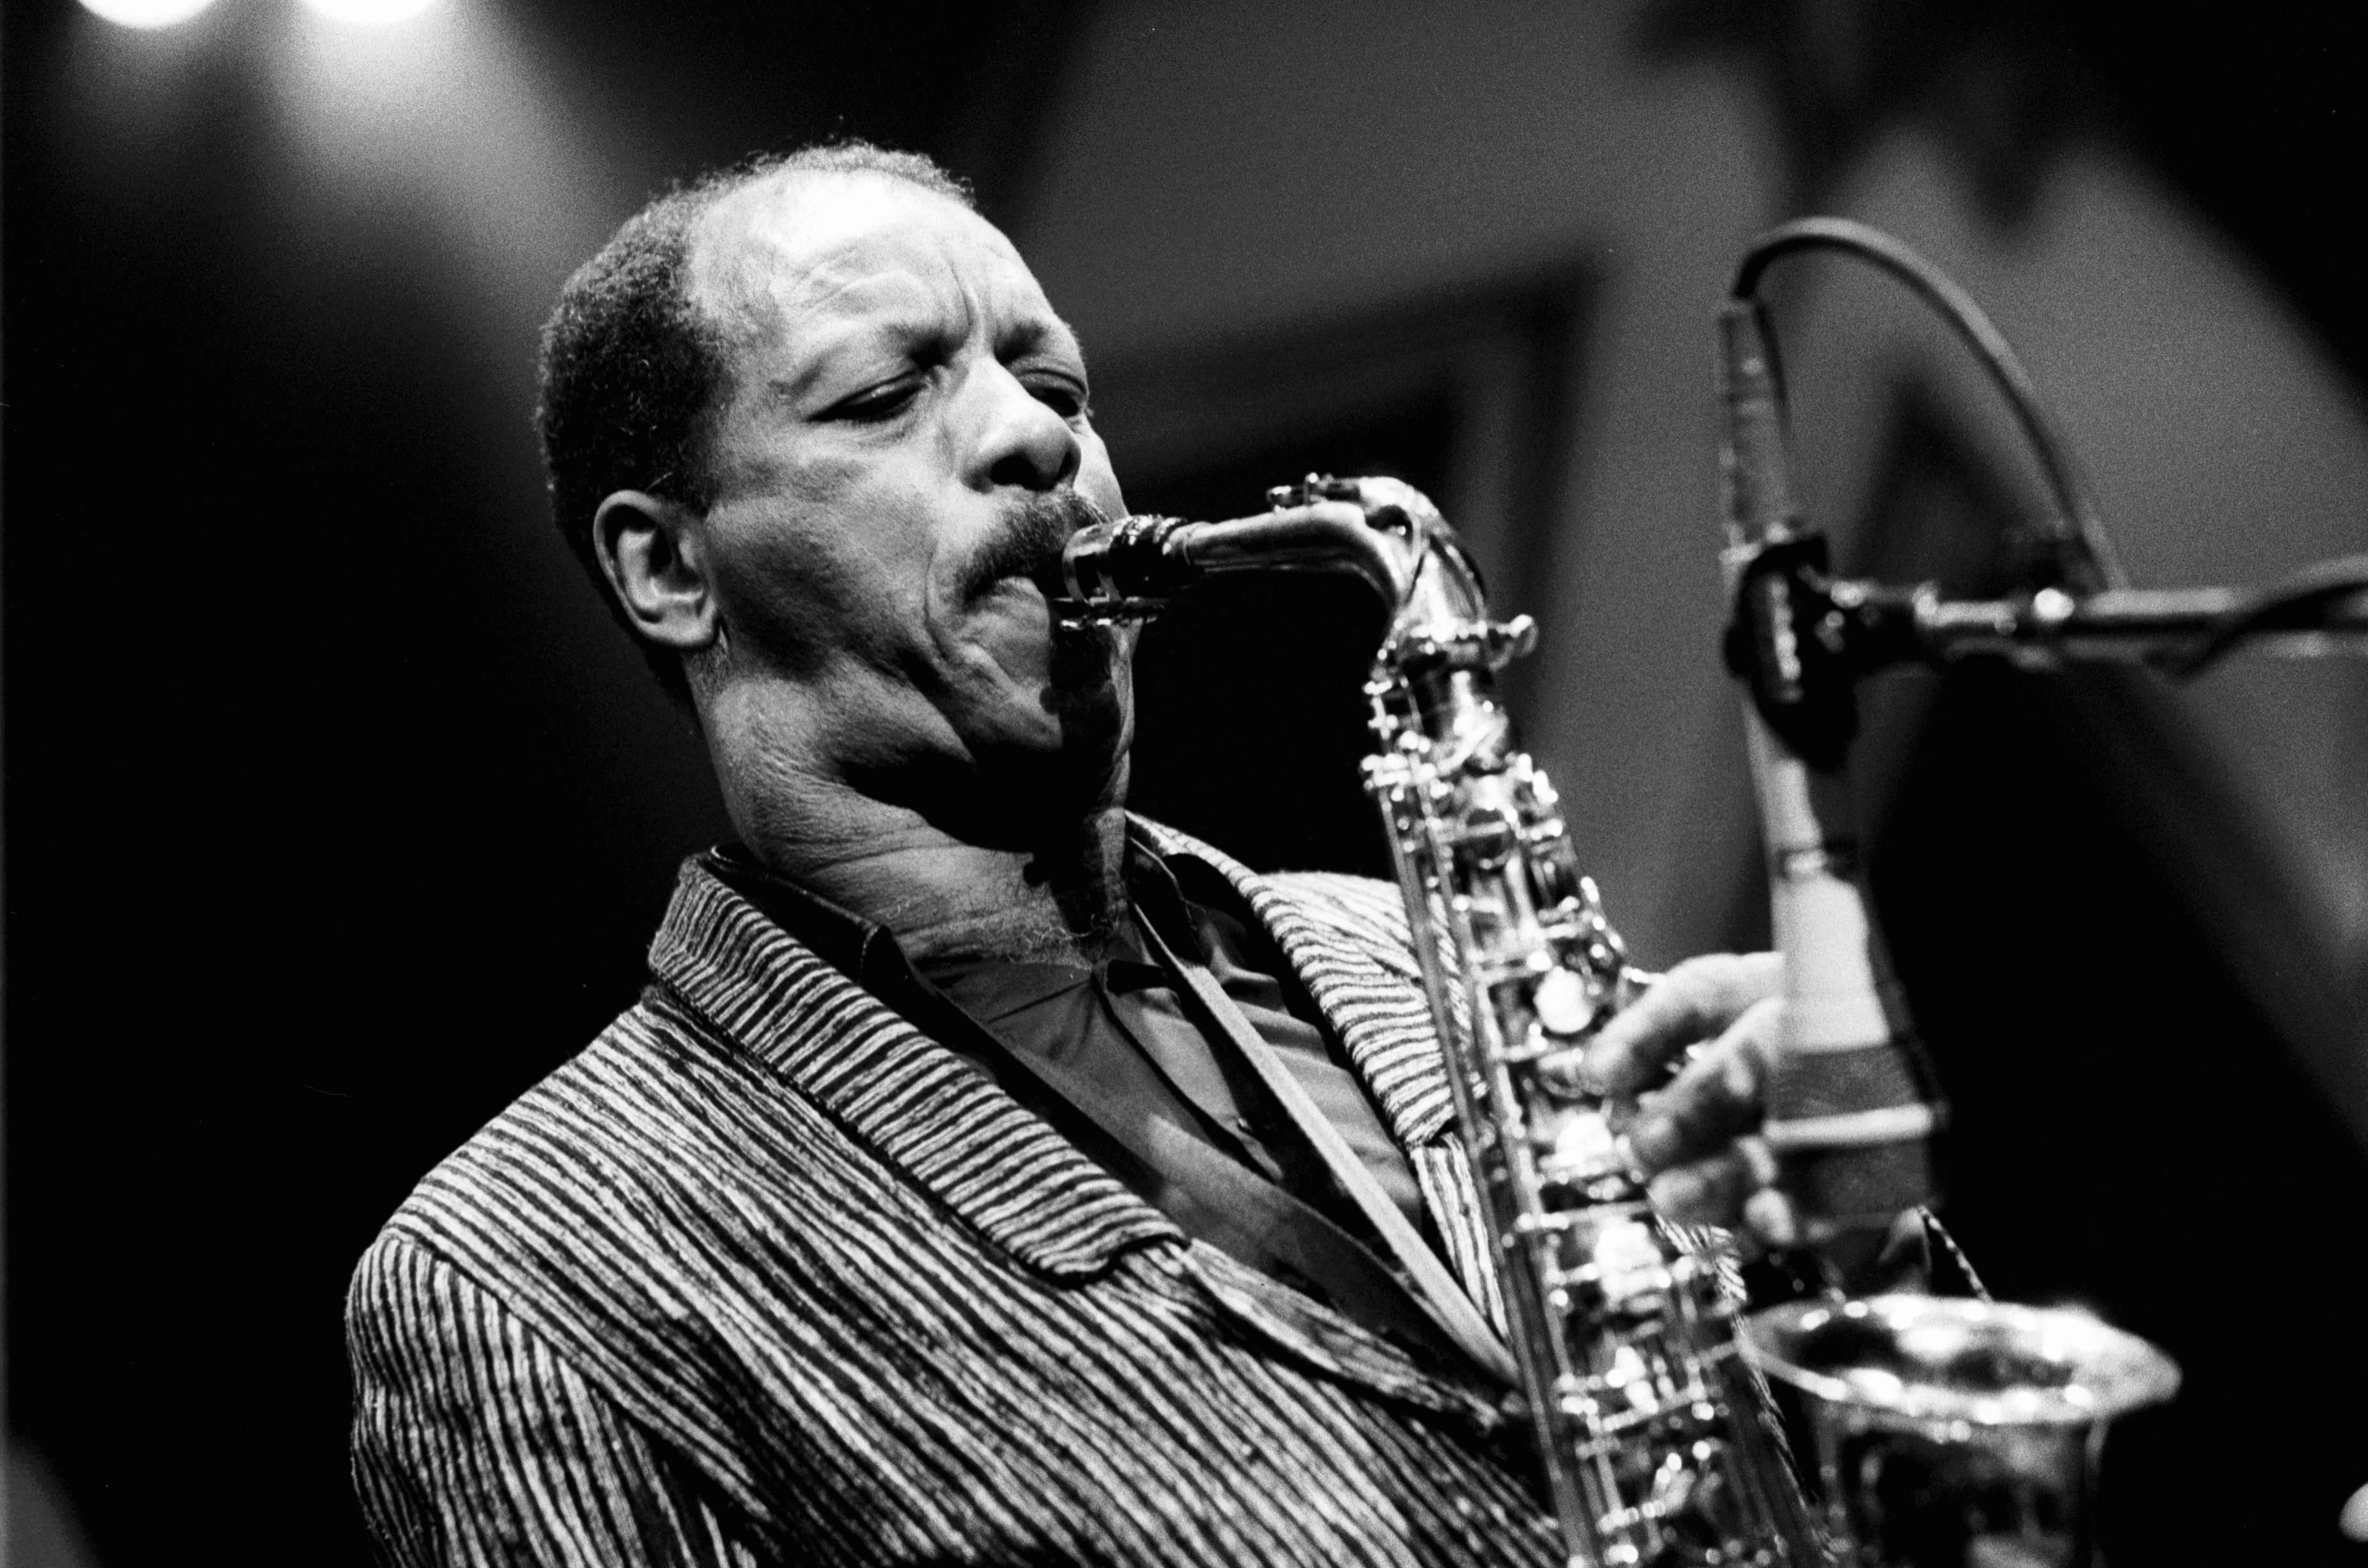 Picture of Ornette Coleman performing with Alto Sax live on stage at Melkweg in Amsterdam, Netherlands on November 09 1984 (photo by Frans Schellekens/Redferns)